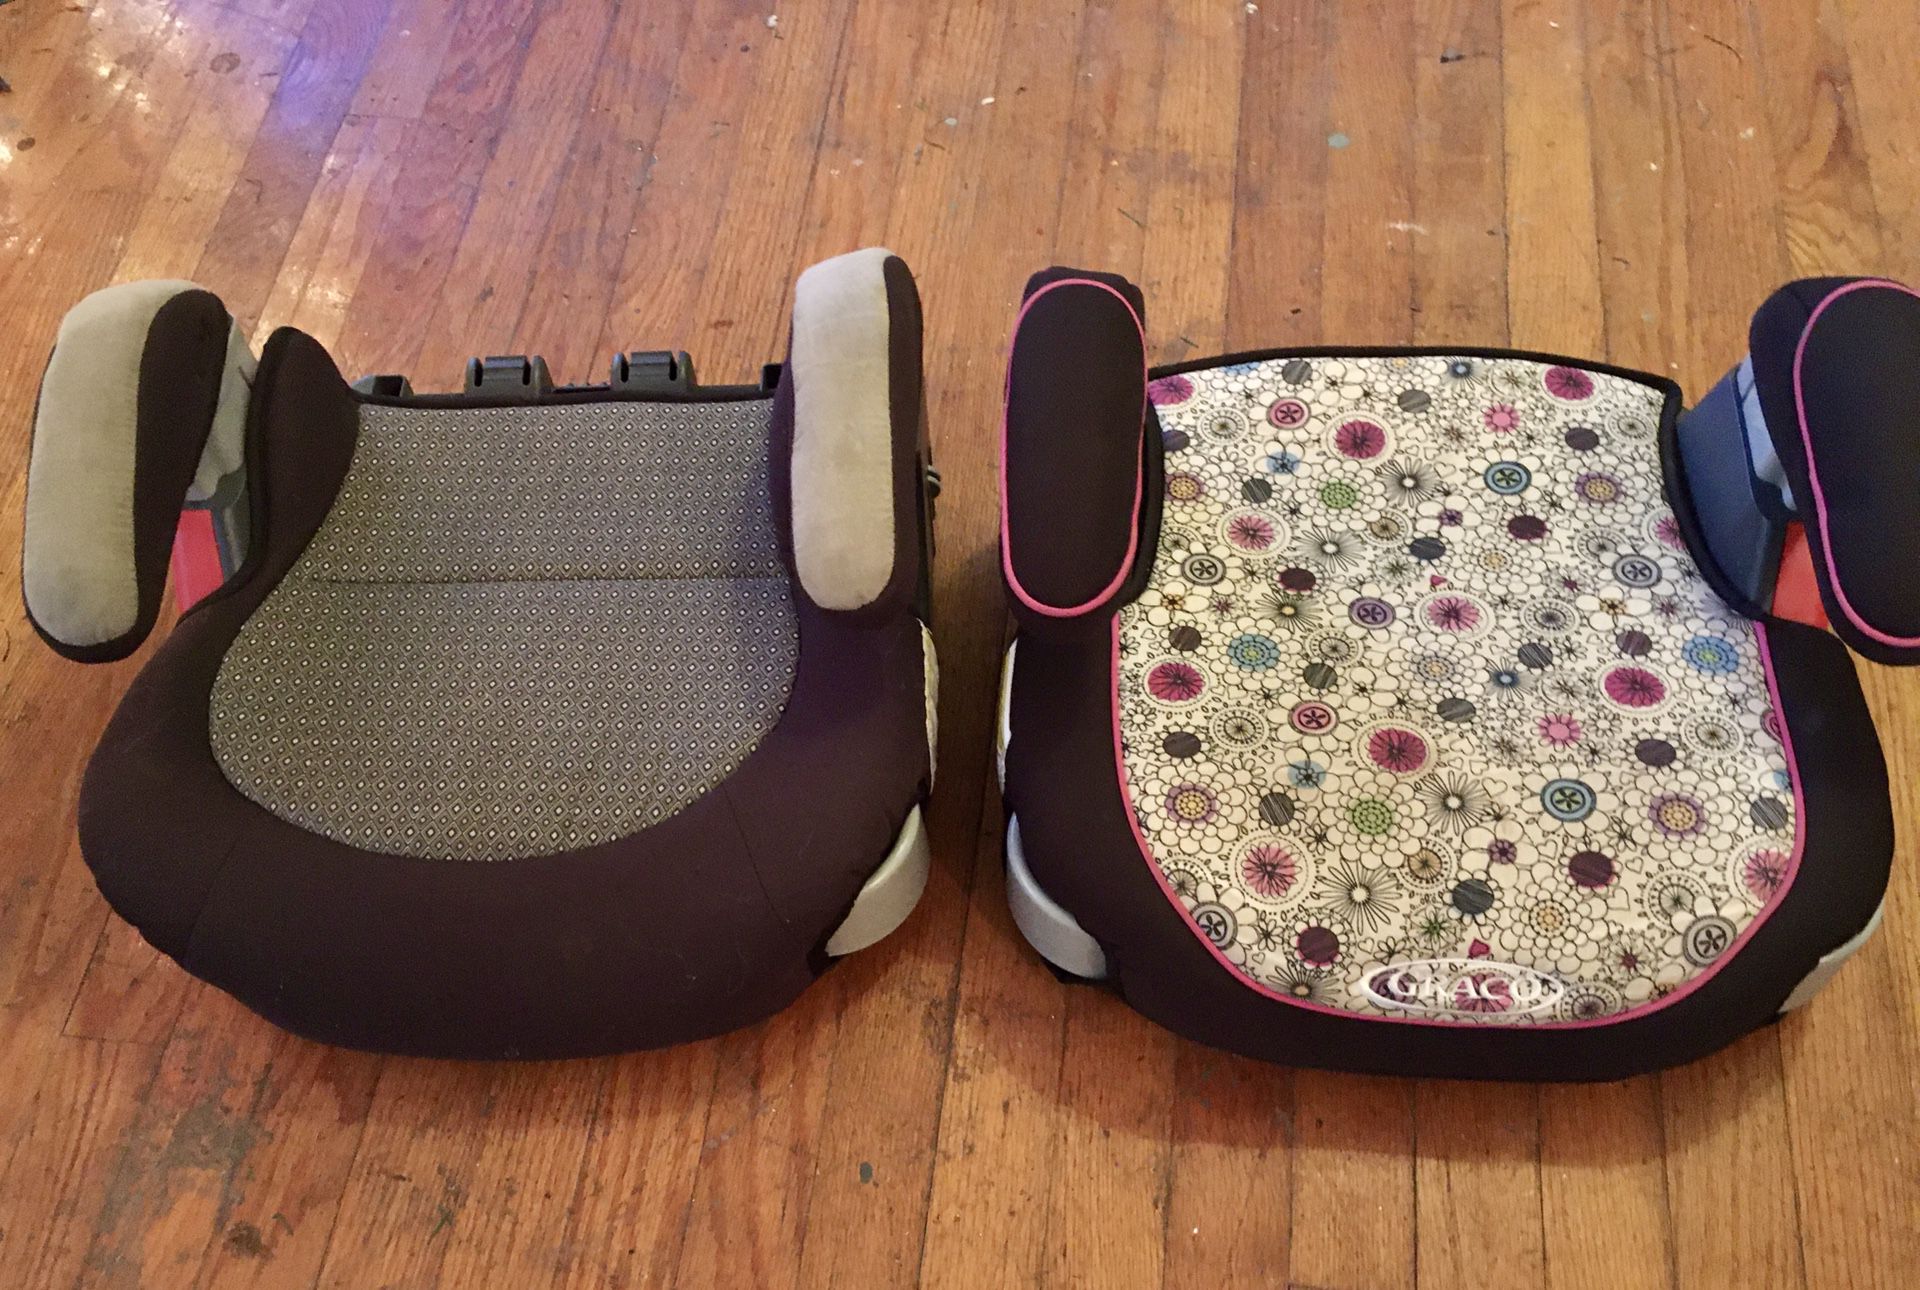 2 Toddler Booster Seats